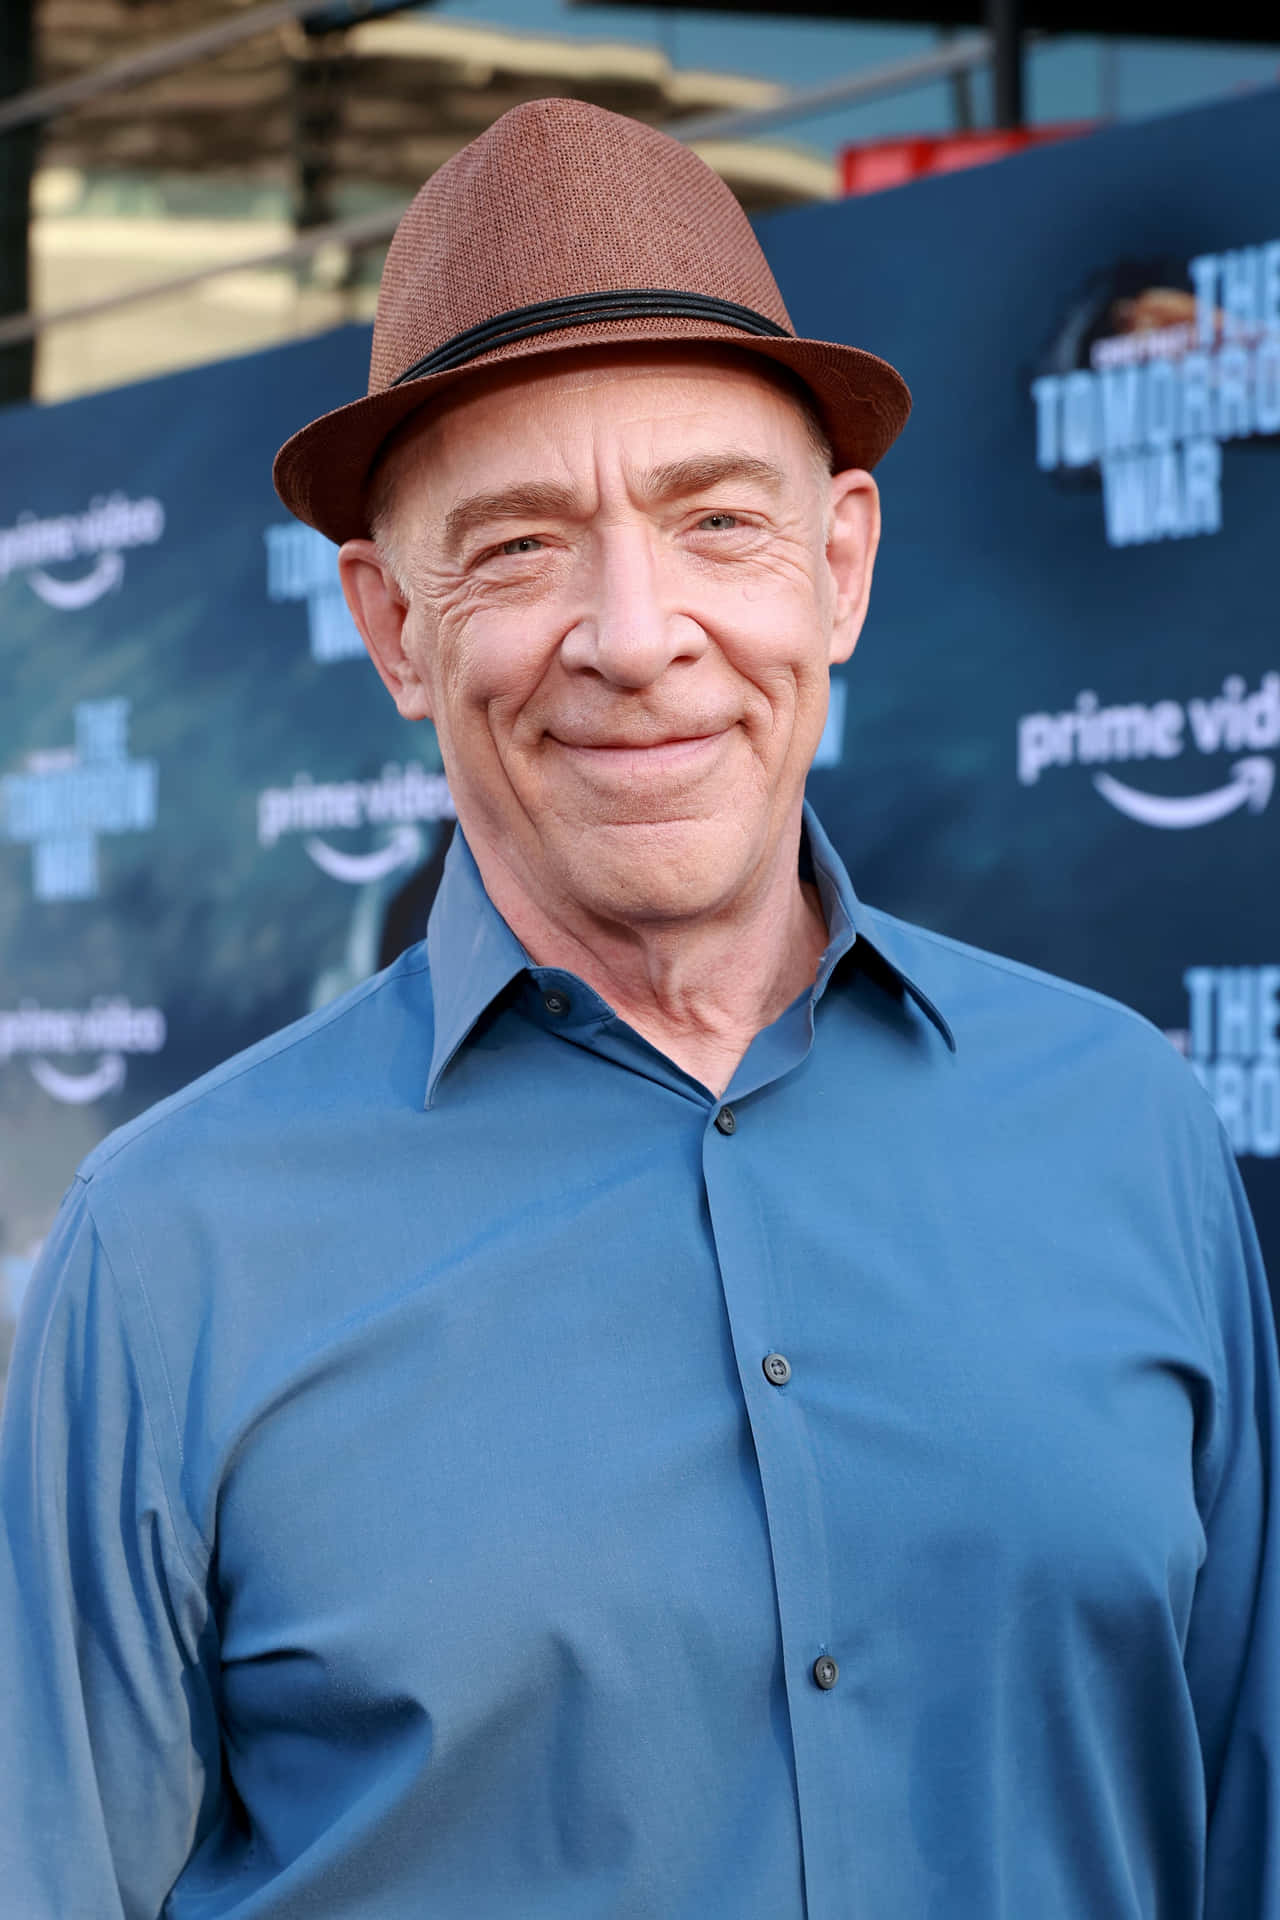 J.K. Simmons in a Thoughtful Pose Wallpaper